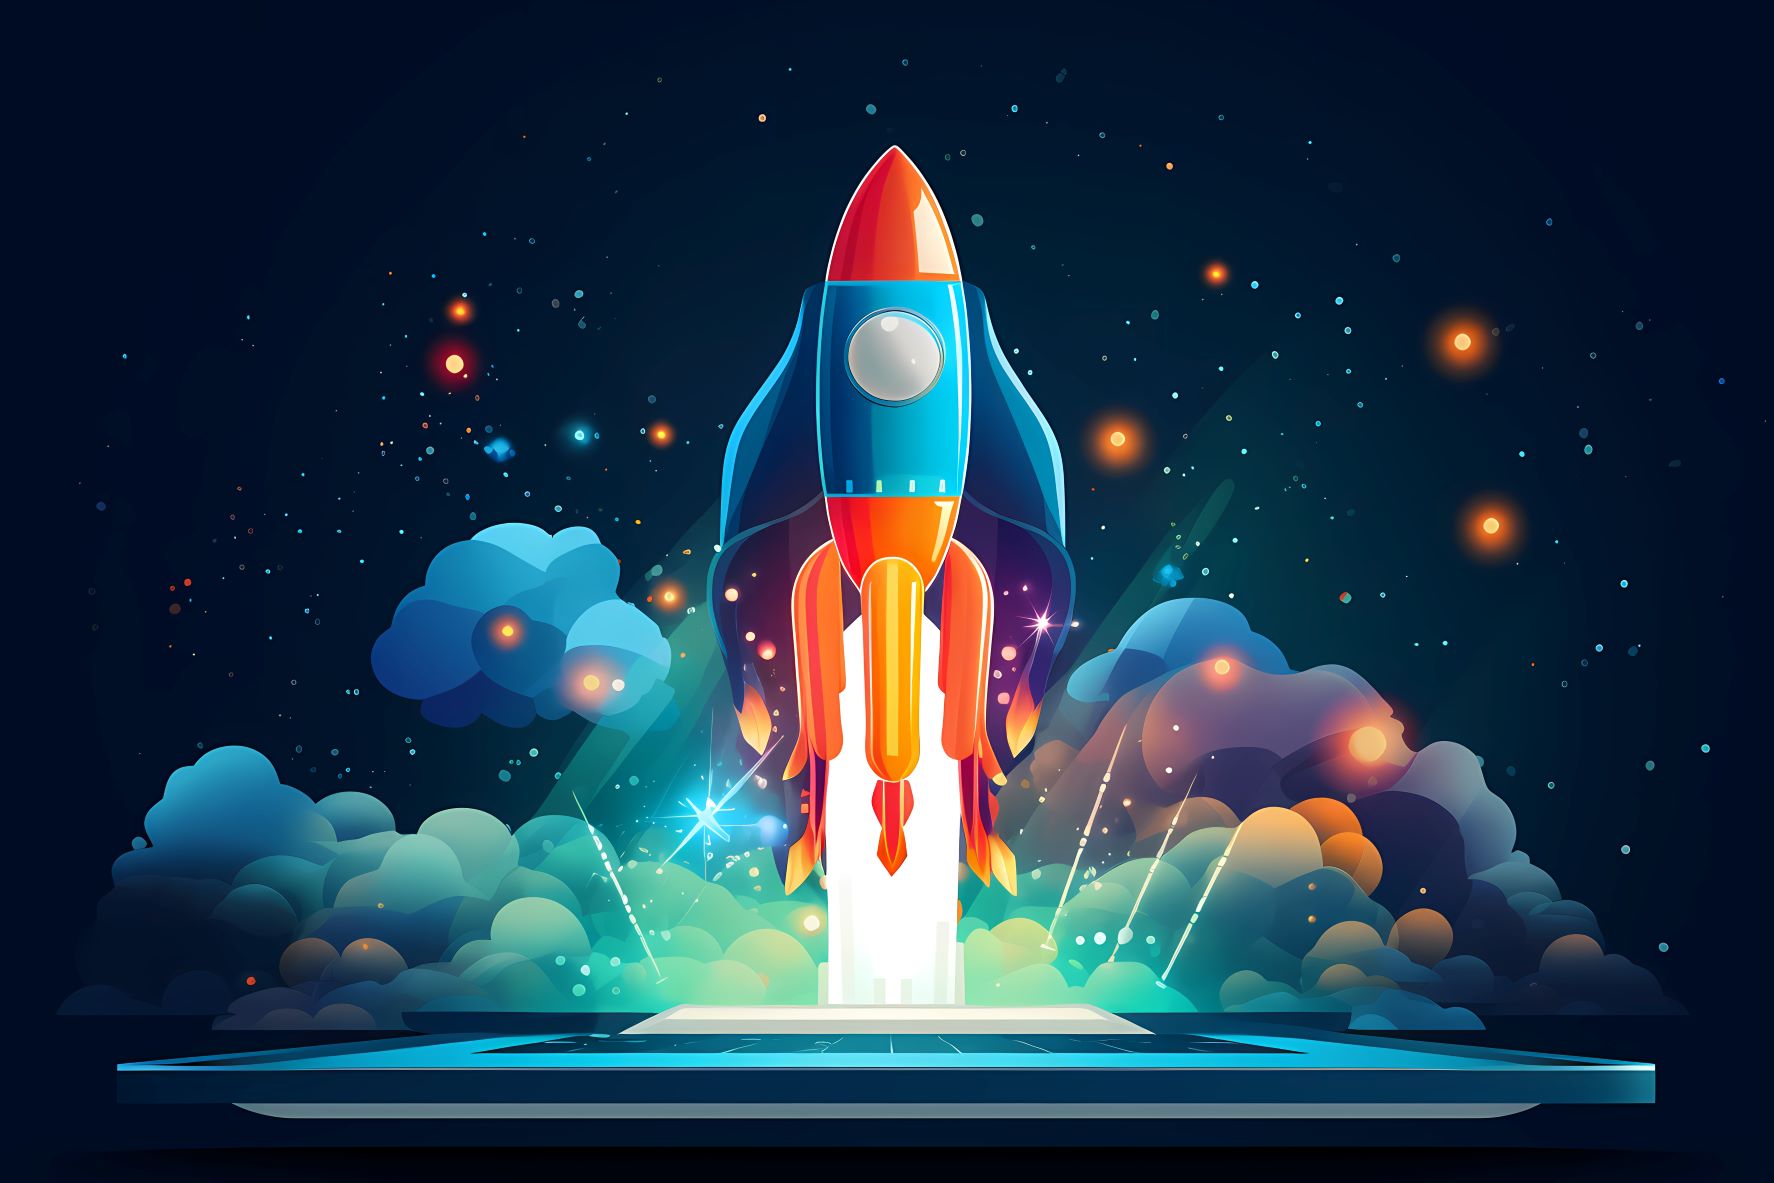 Blast off with fresh website content